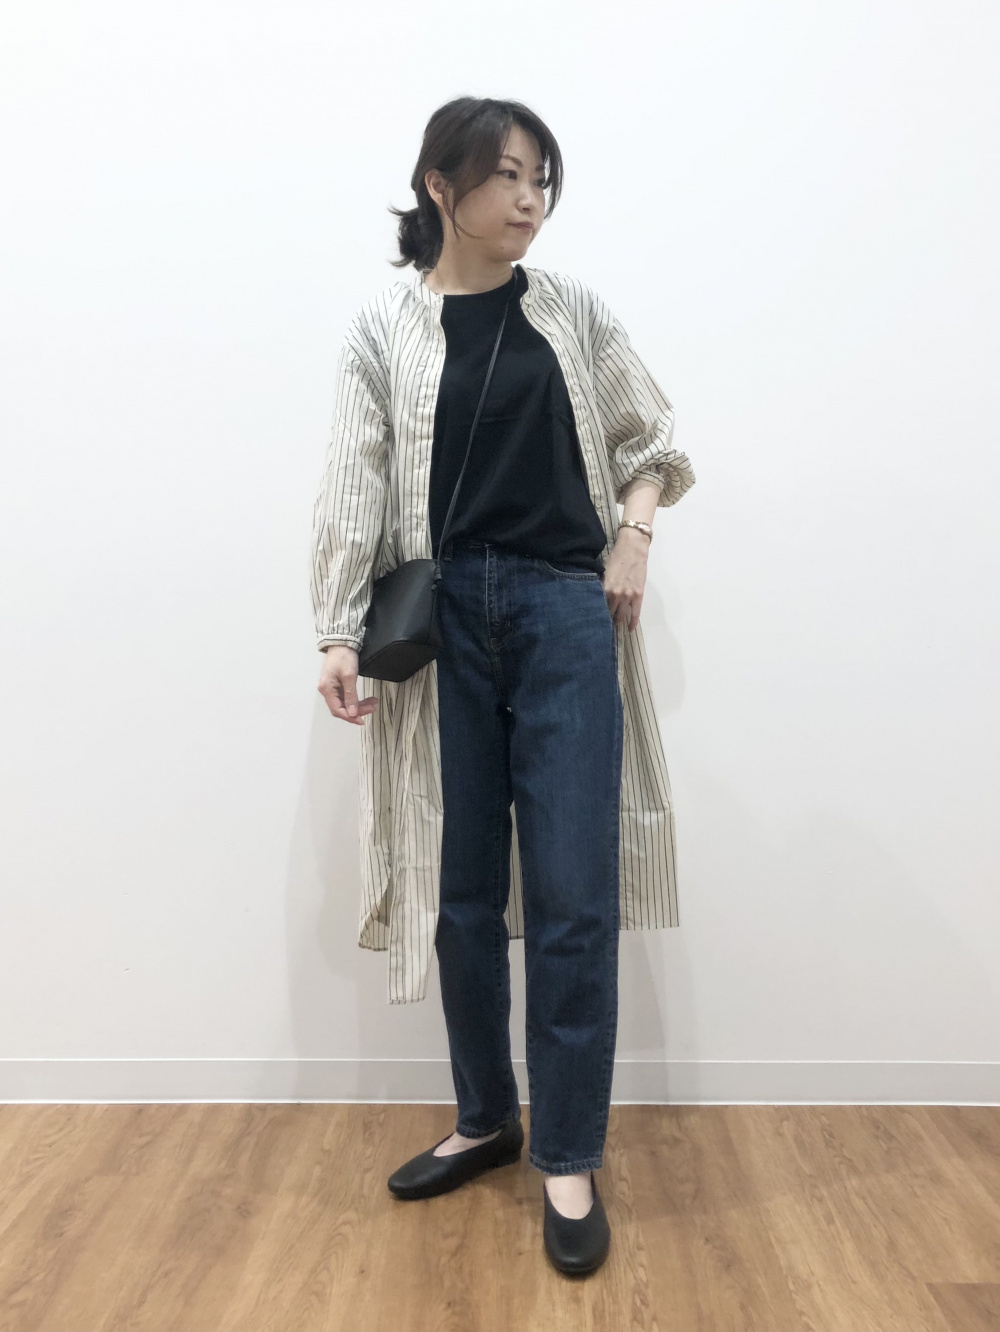 Check styling ideas for「Faux-Leather Square Shoulder Bag」